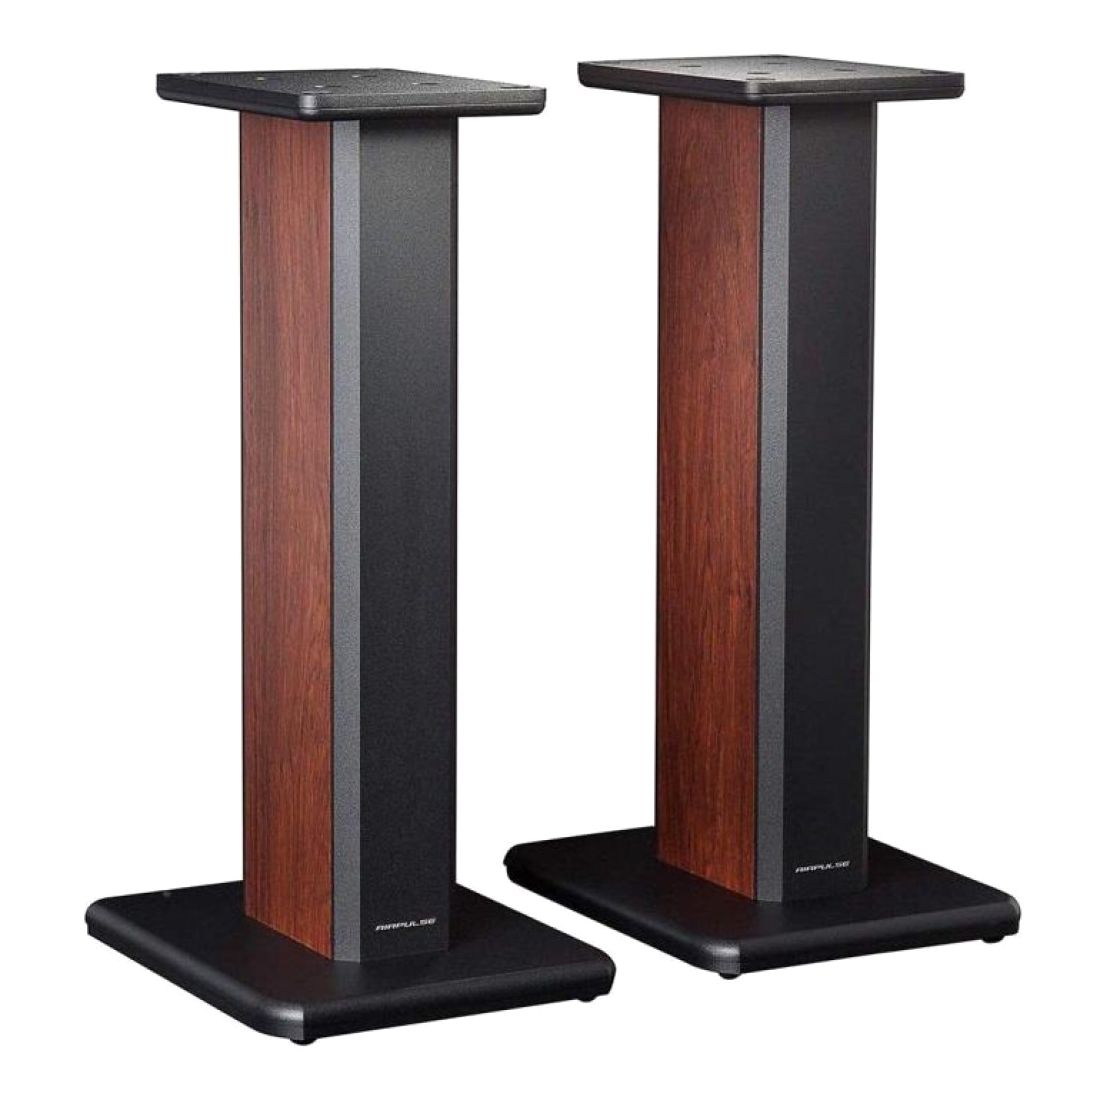 Edifier Airpulse Bookshelf Speakers Stand For A300 - Brown (Set of 2) (ST300 BN)